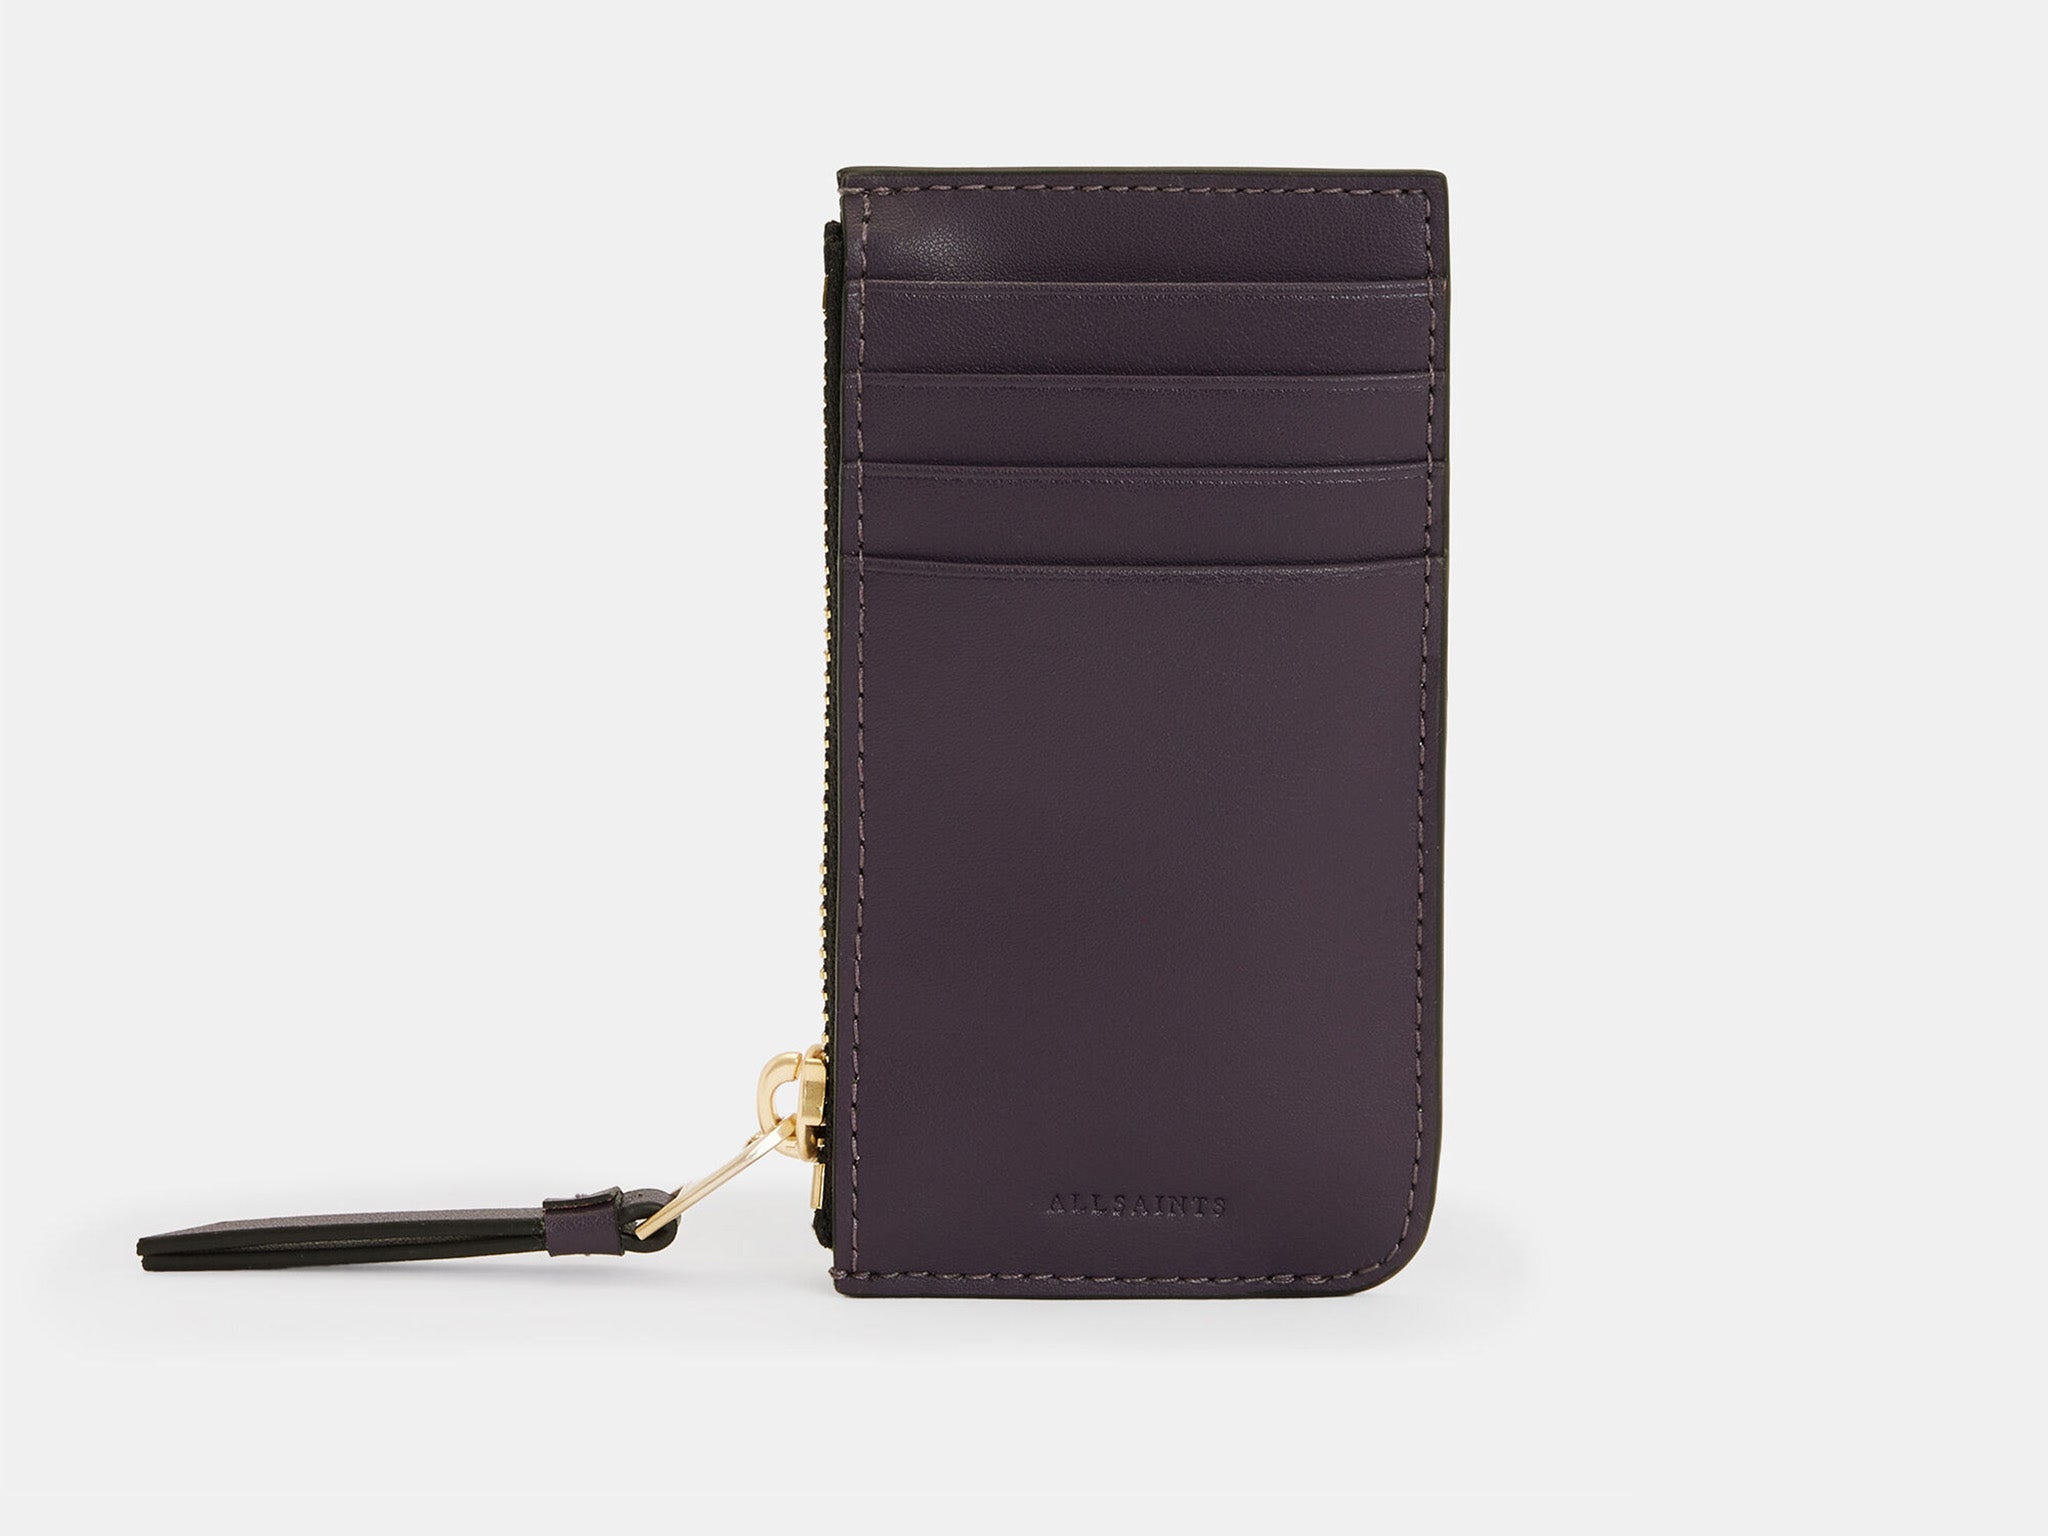 best-gift-for-mum-indybest-review-All Saints Marlborough Leather Wallet.jpg